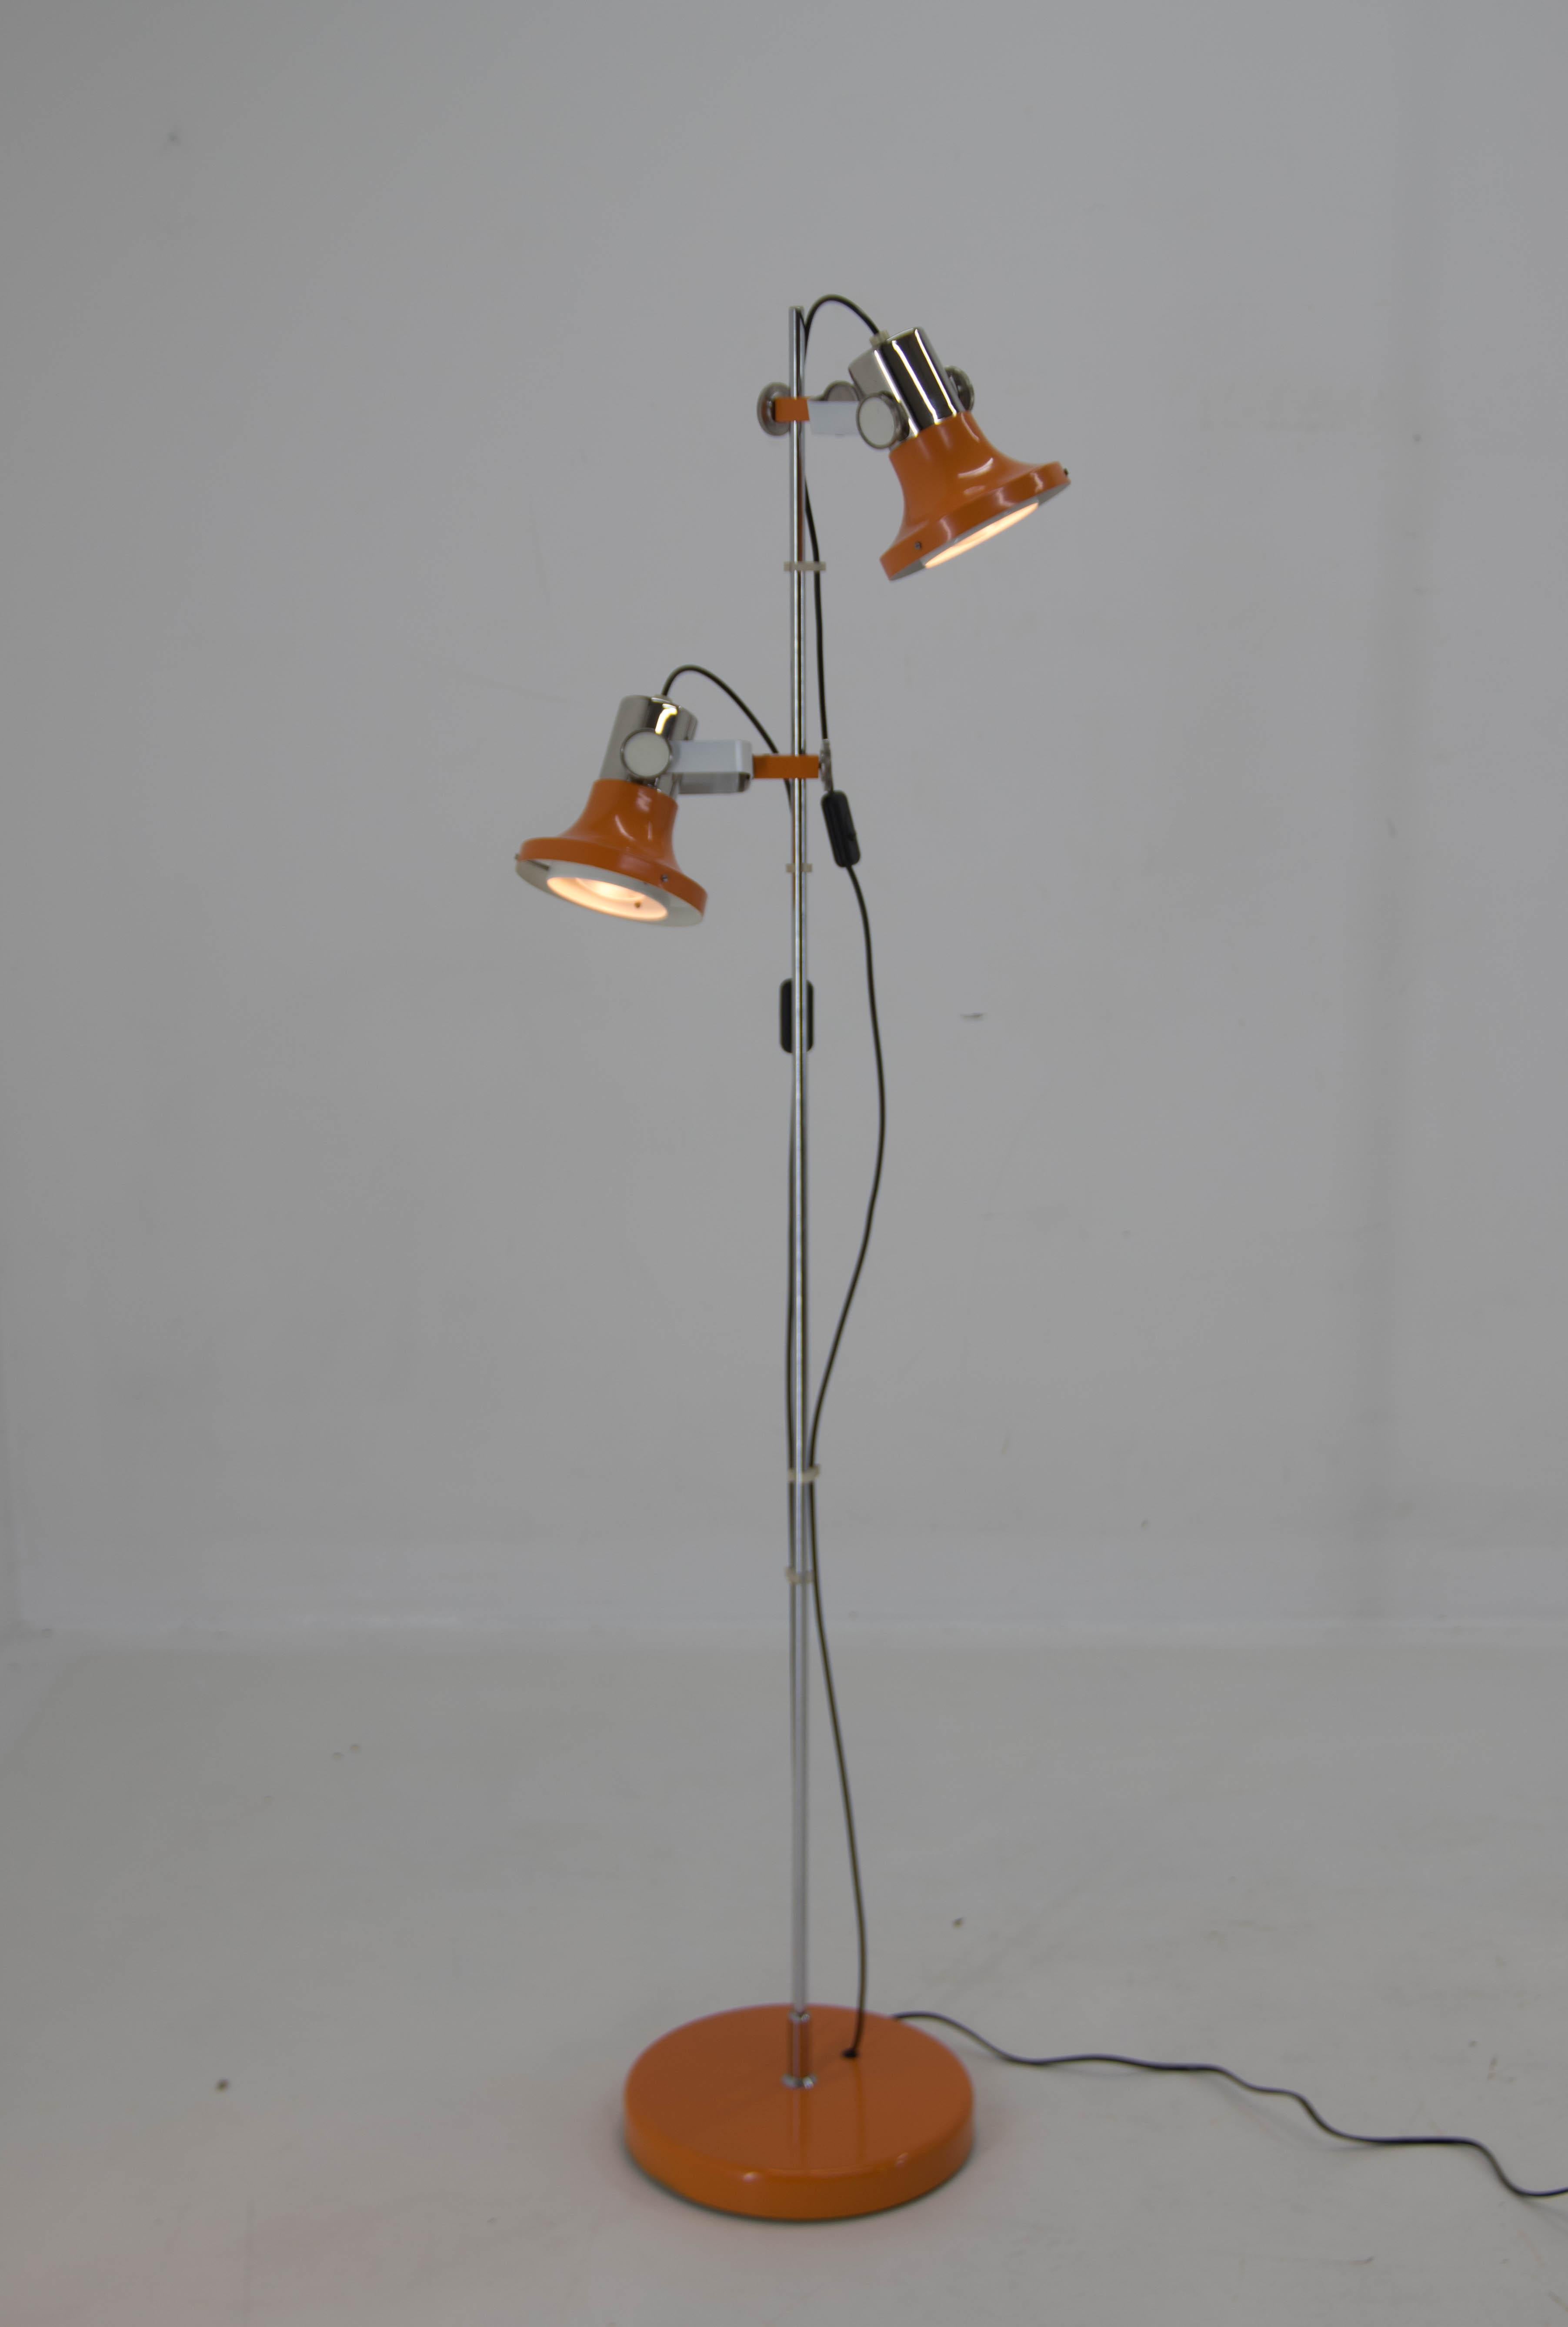 Designed by Pavel Grus in 1960s
Completely restored - excellent condition
New orange paint.
Rewired: 2x40W, E25-E27 bulbs
US plug adapter included.
 